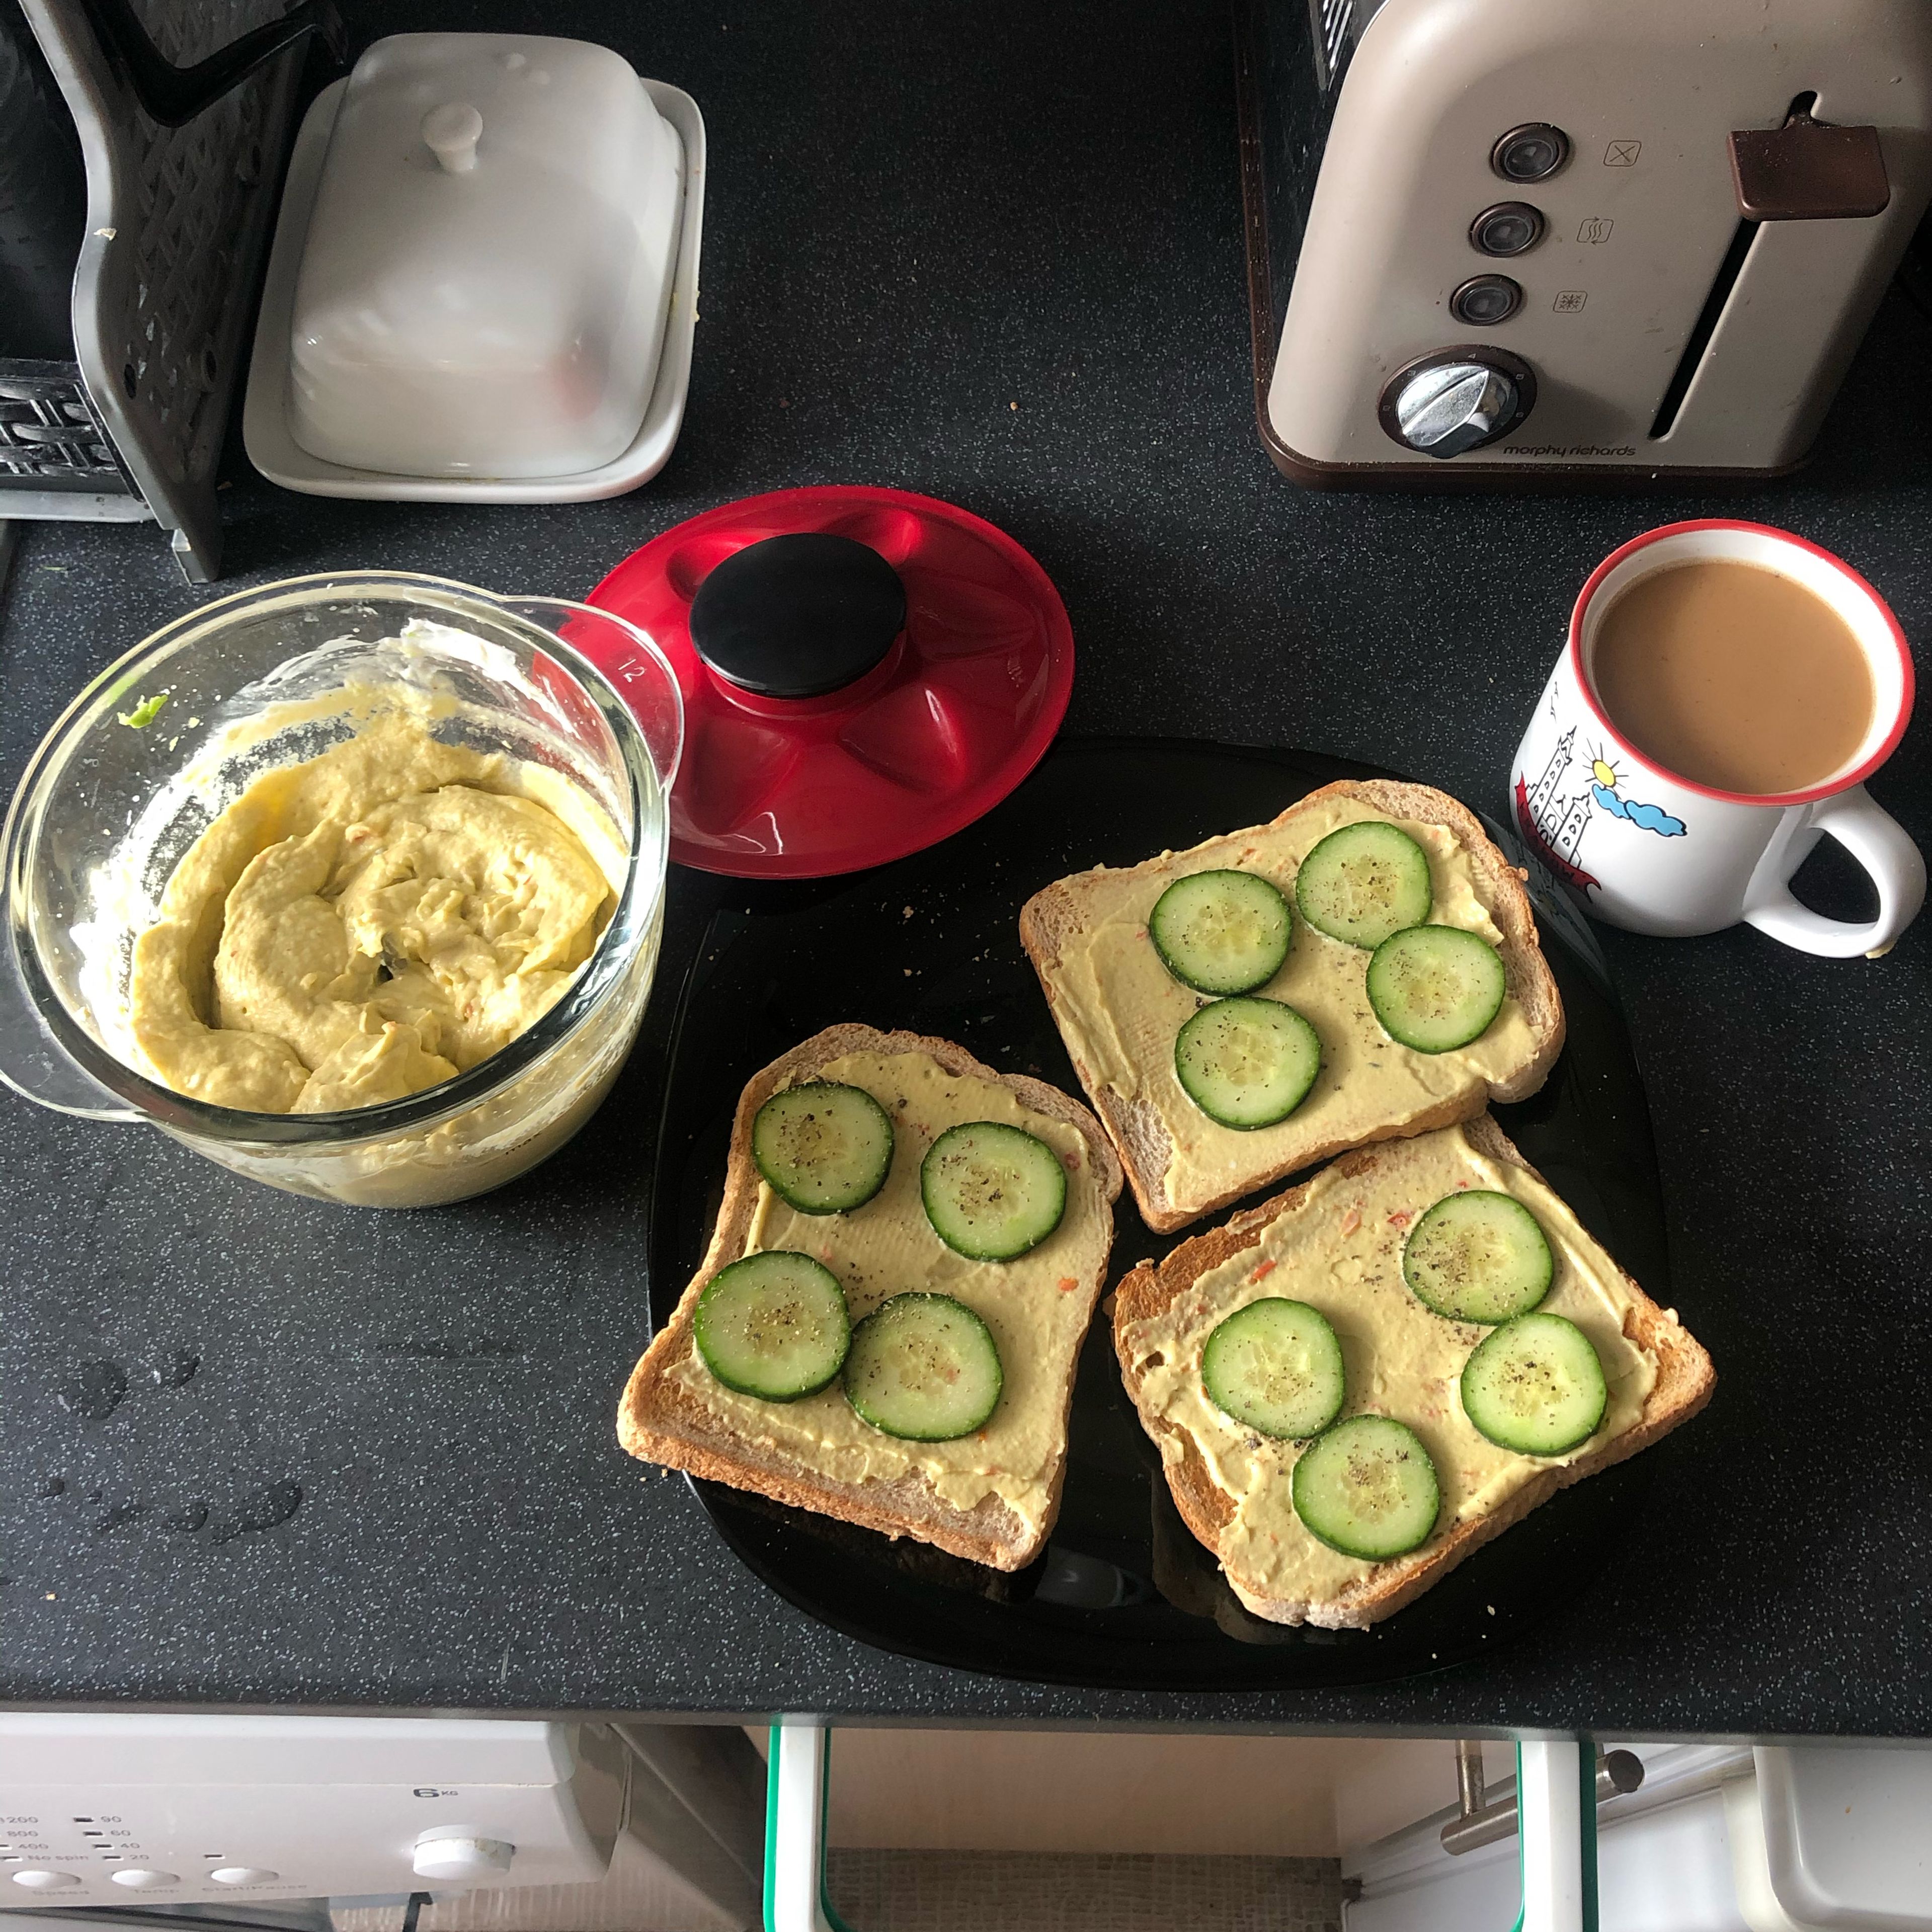 Spread over toasted bread, add cucumber, salt and pepper to taste. Serve with coffee for breakfast. 😋